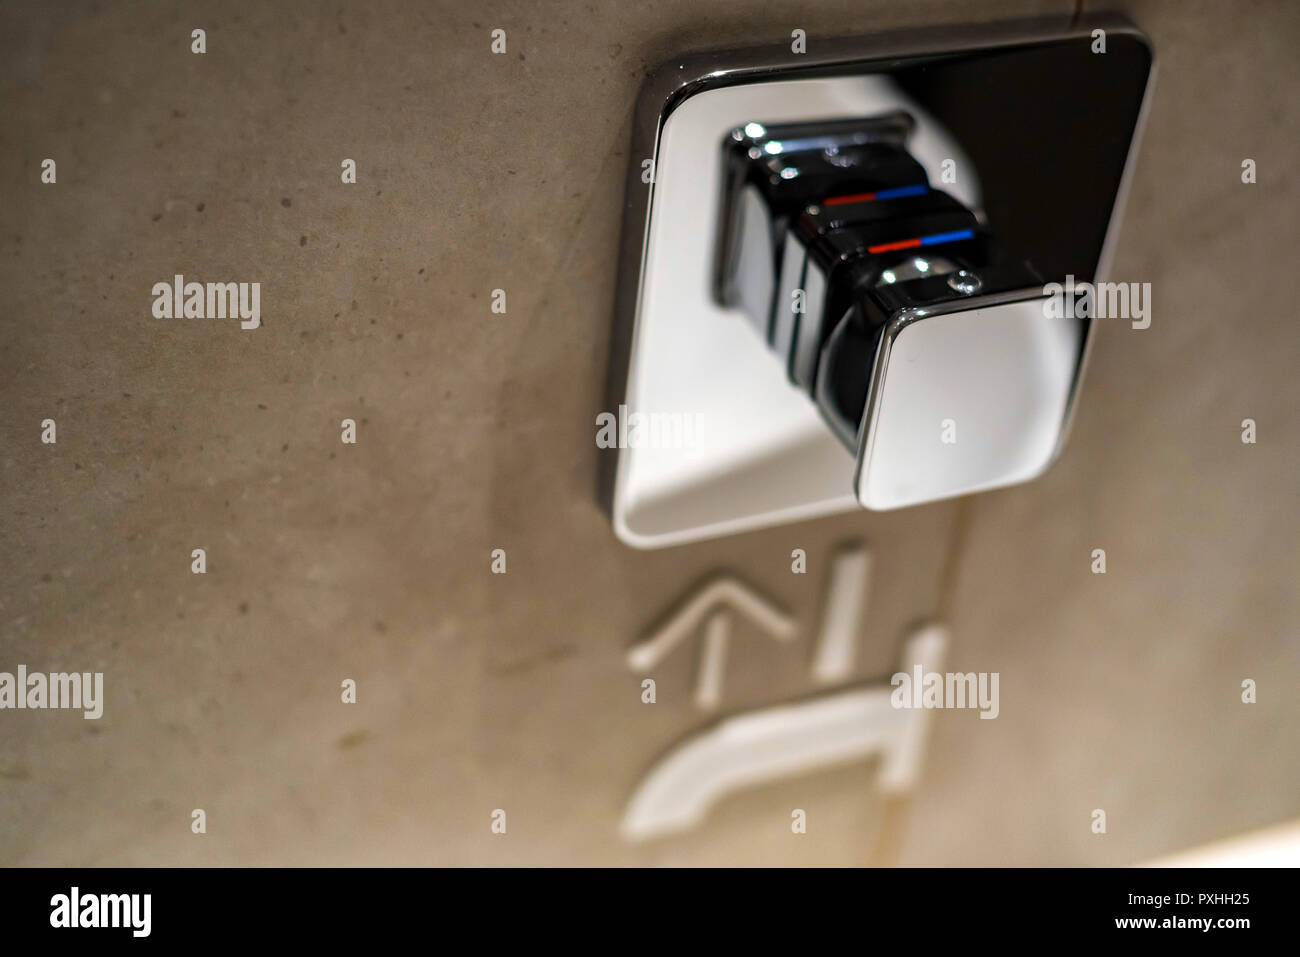 Chrome button to start tap water in public toilet Stock Photo